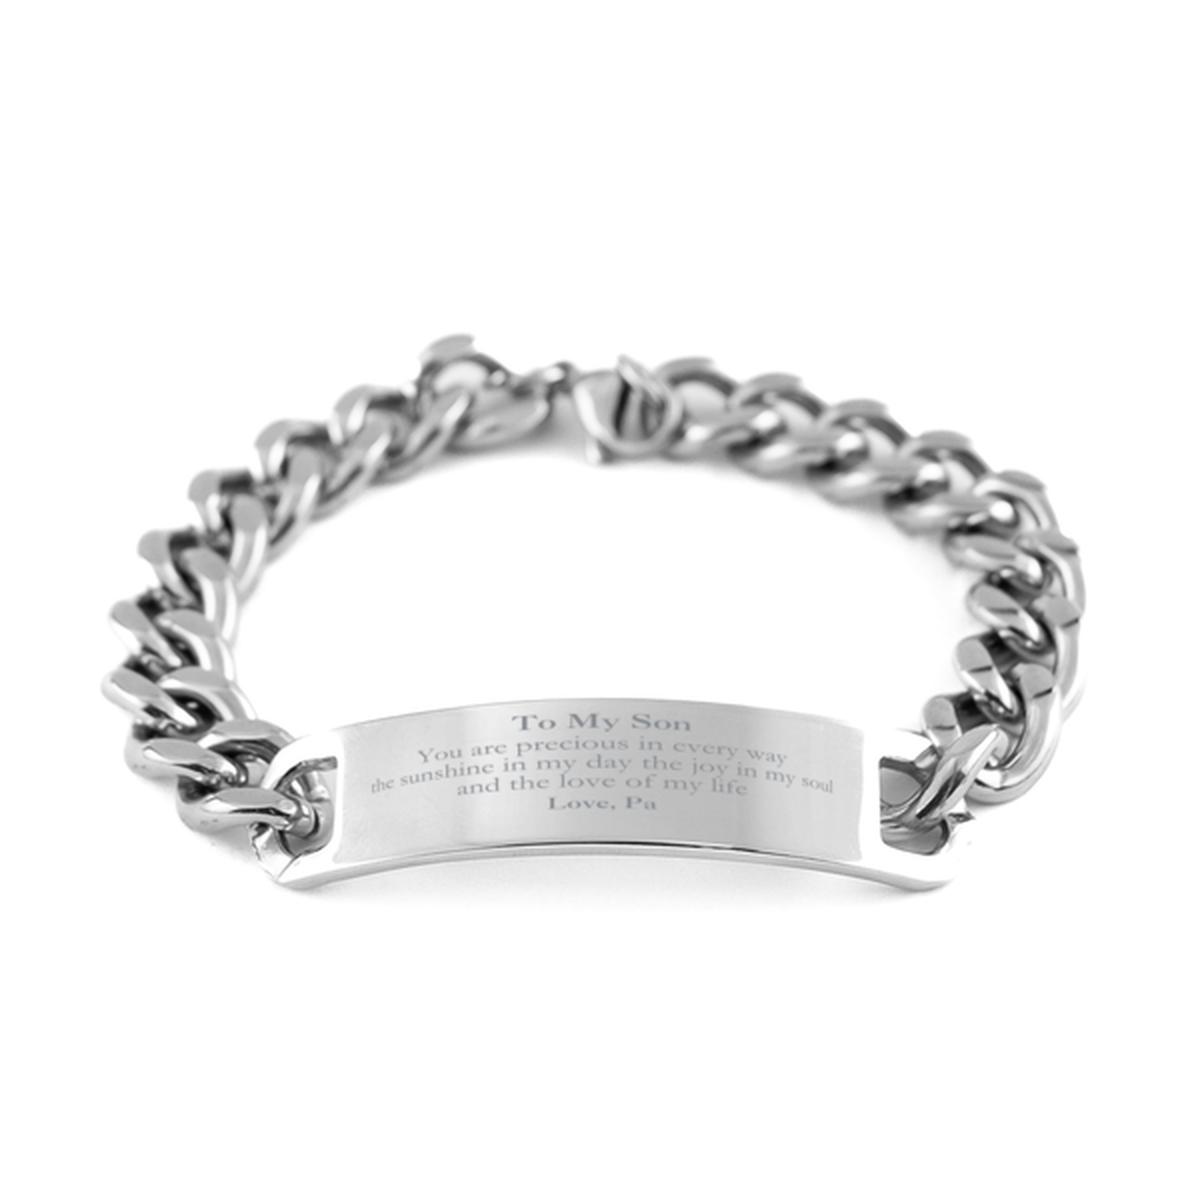 Graduation Gifts for Son Cuban Chain Stainless Steel Bracelet Present from Pa, Christmas Son Birthday Gifts Son You are precious in every way the sunshine in my day. Love, Pa